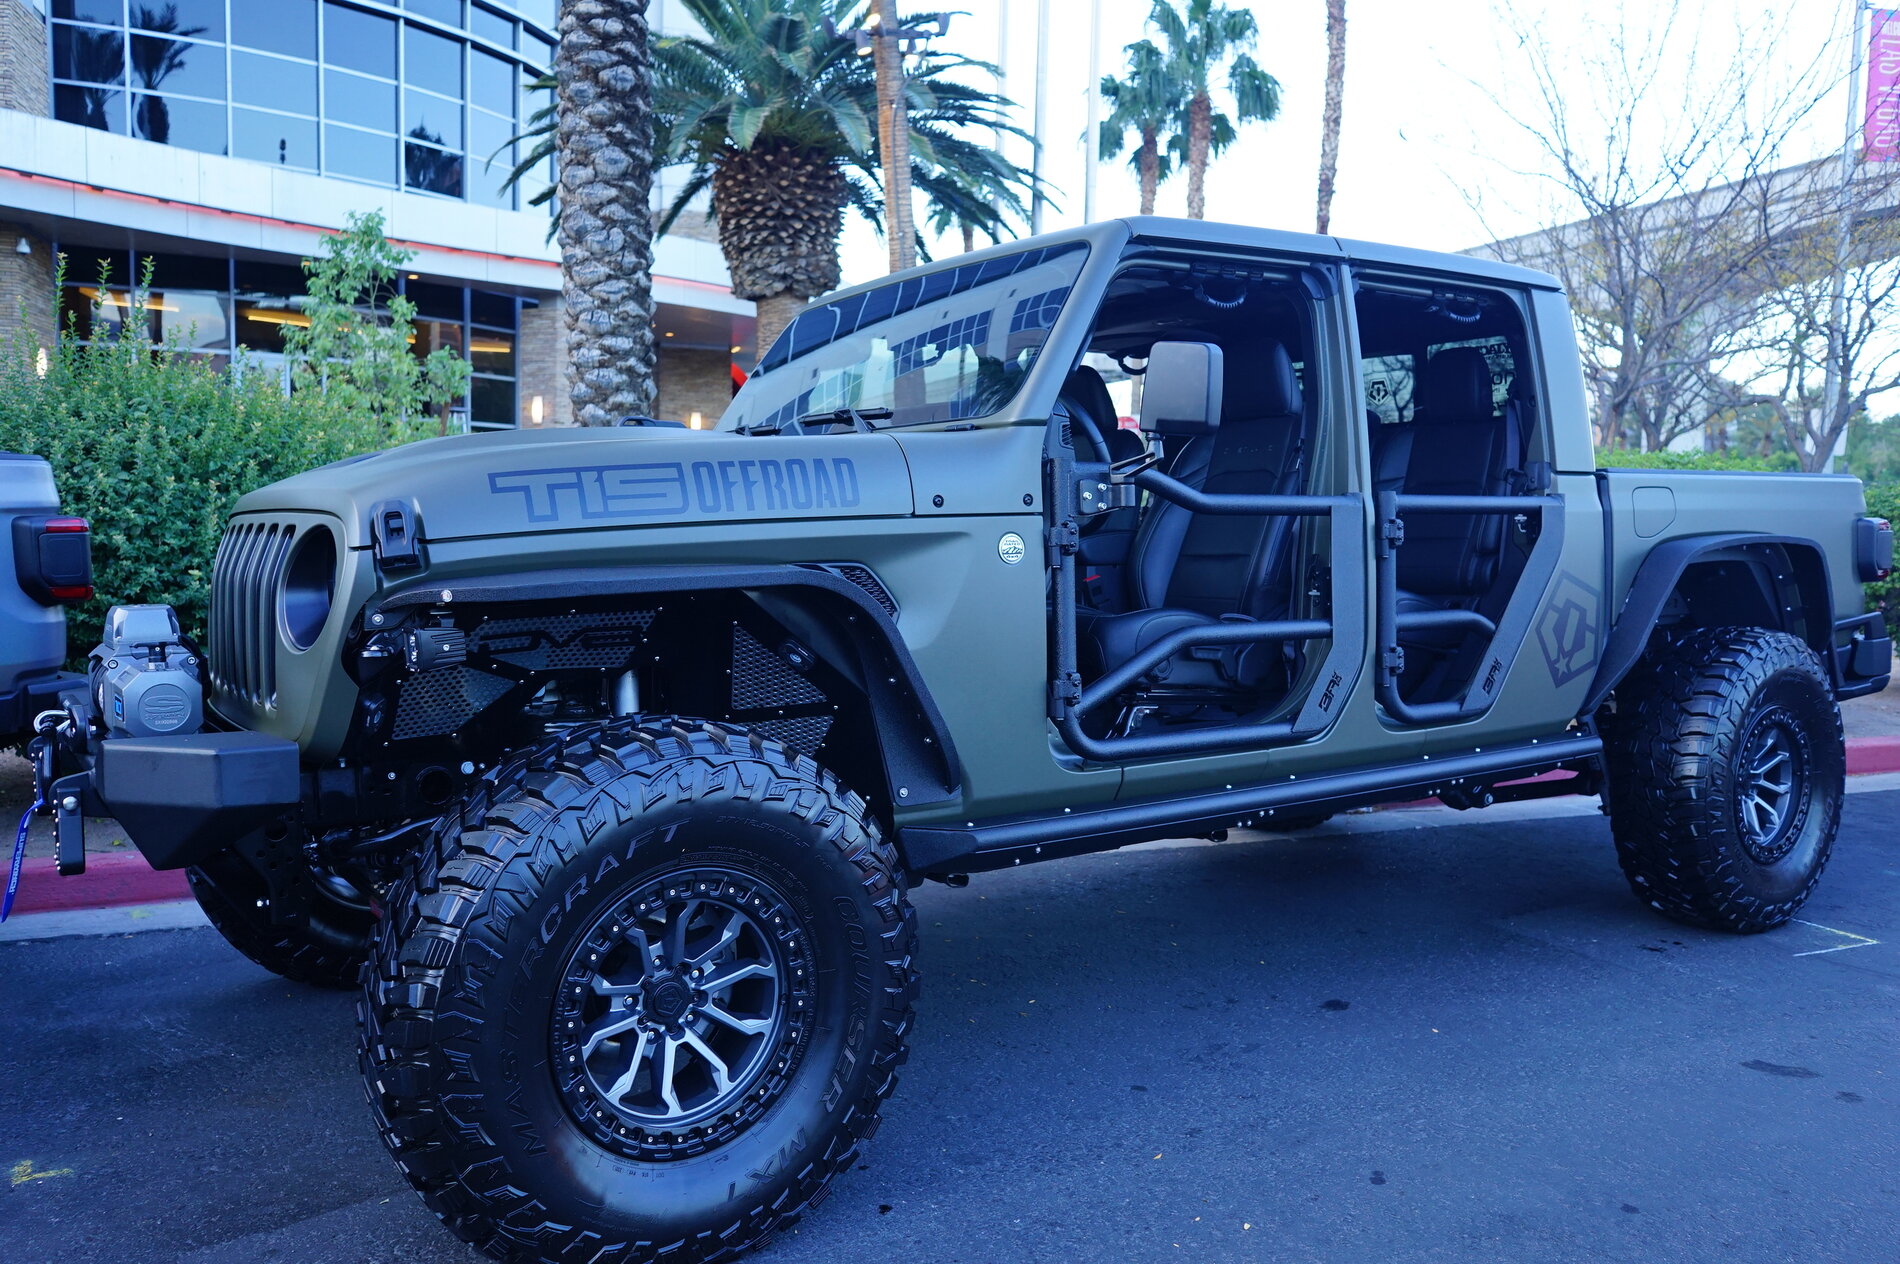 Jeep Gladiator Sema 2021 Gladiators Galore [Add What You Come Across] 195088-5804d8cffd509f61c17f44cd610be75f